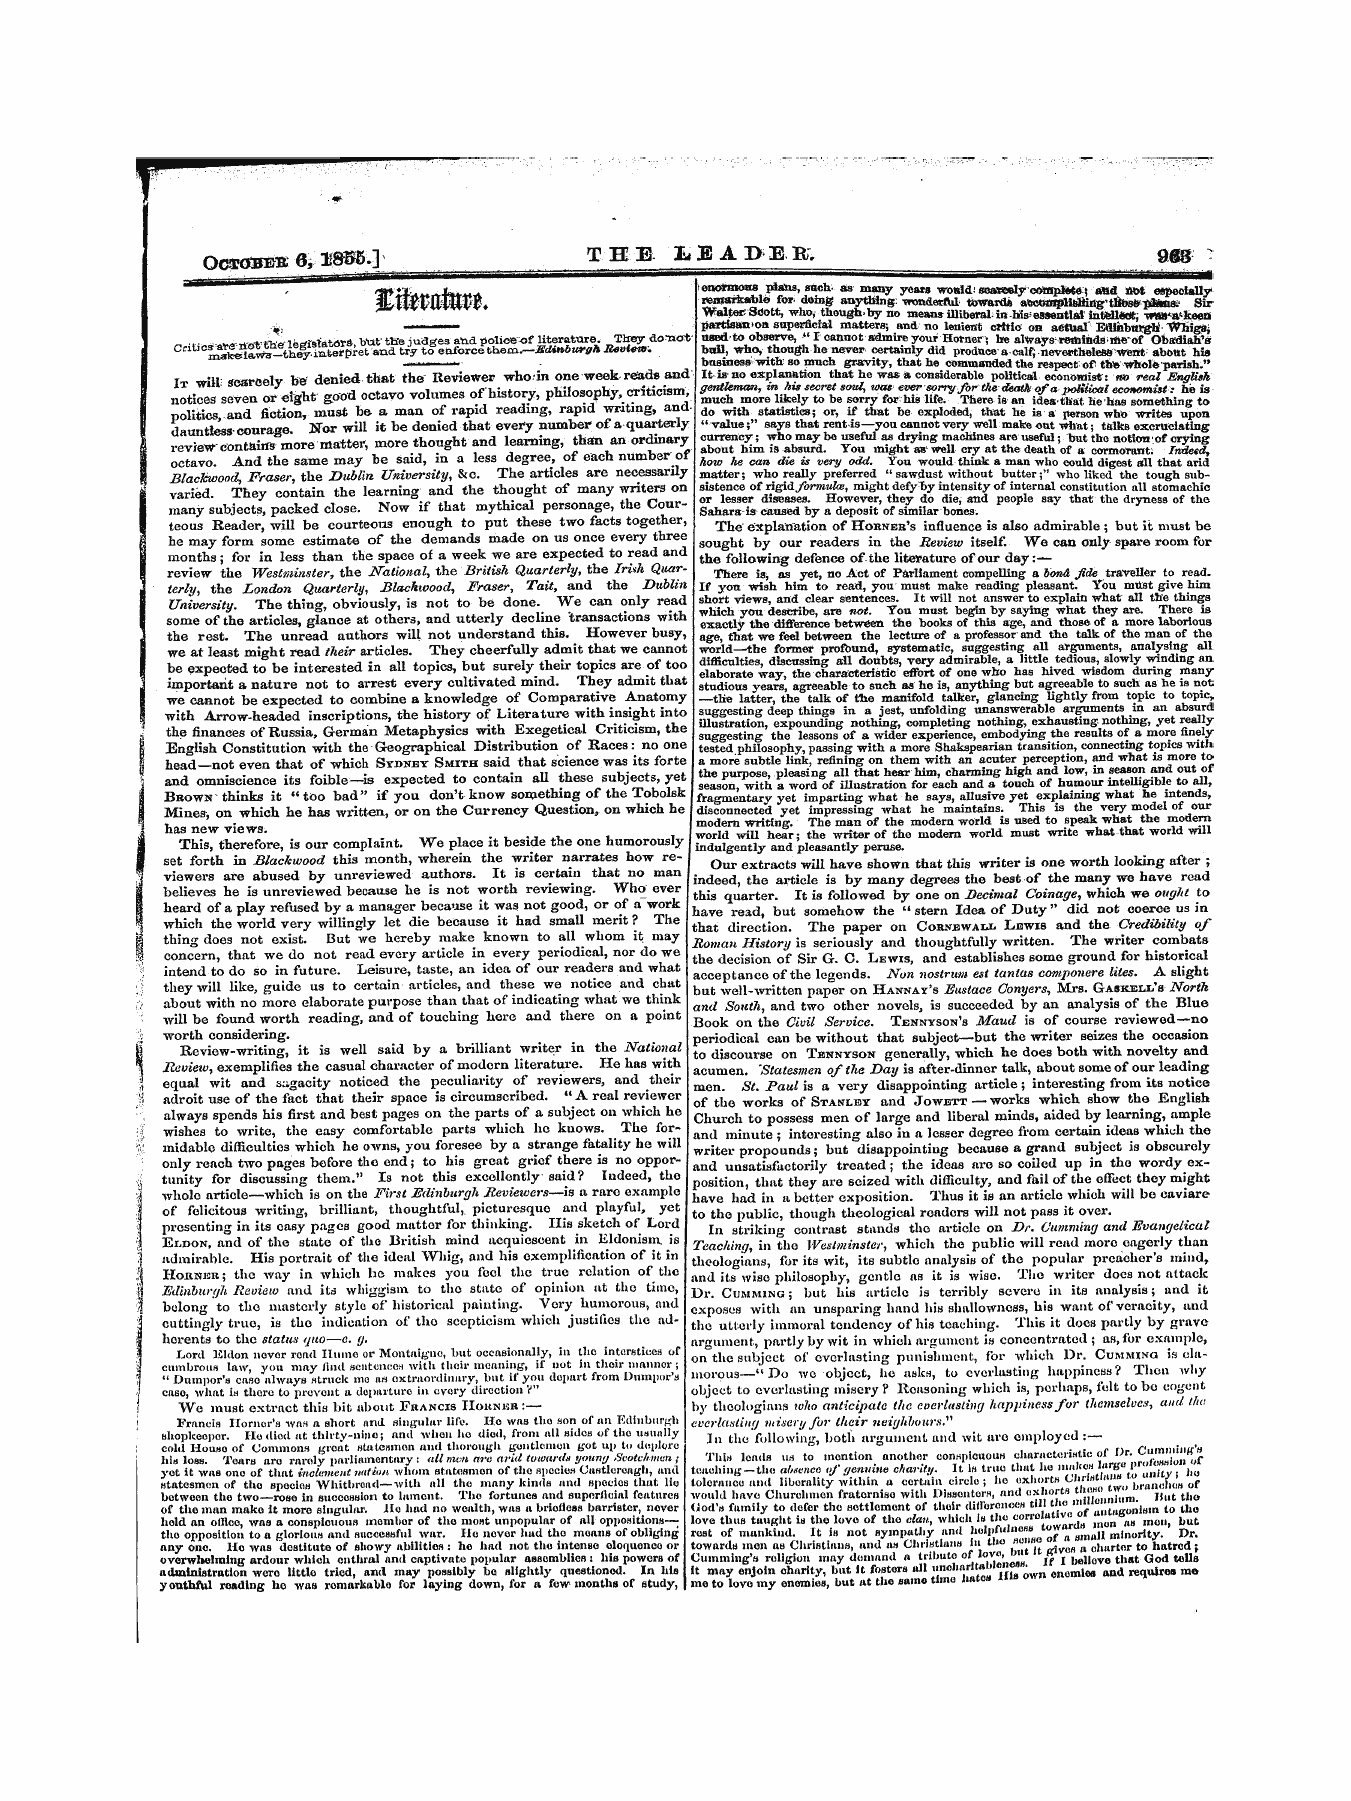 Leader (1850-1860): jS F Y, 1st edition - Jlwpuot^* _ ¦